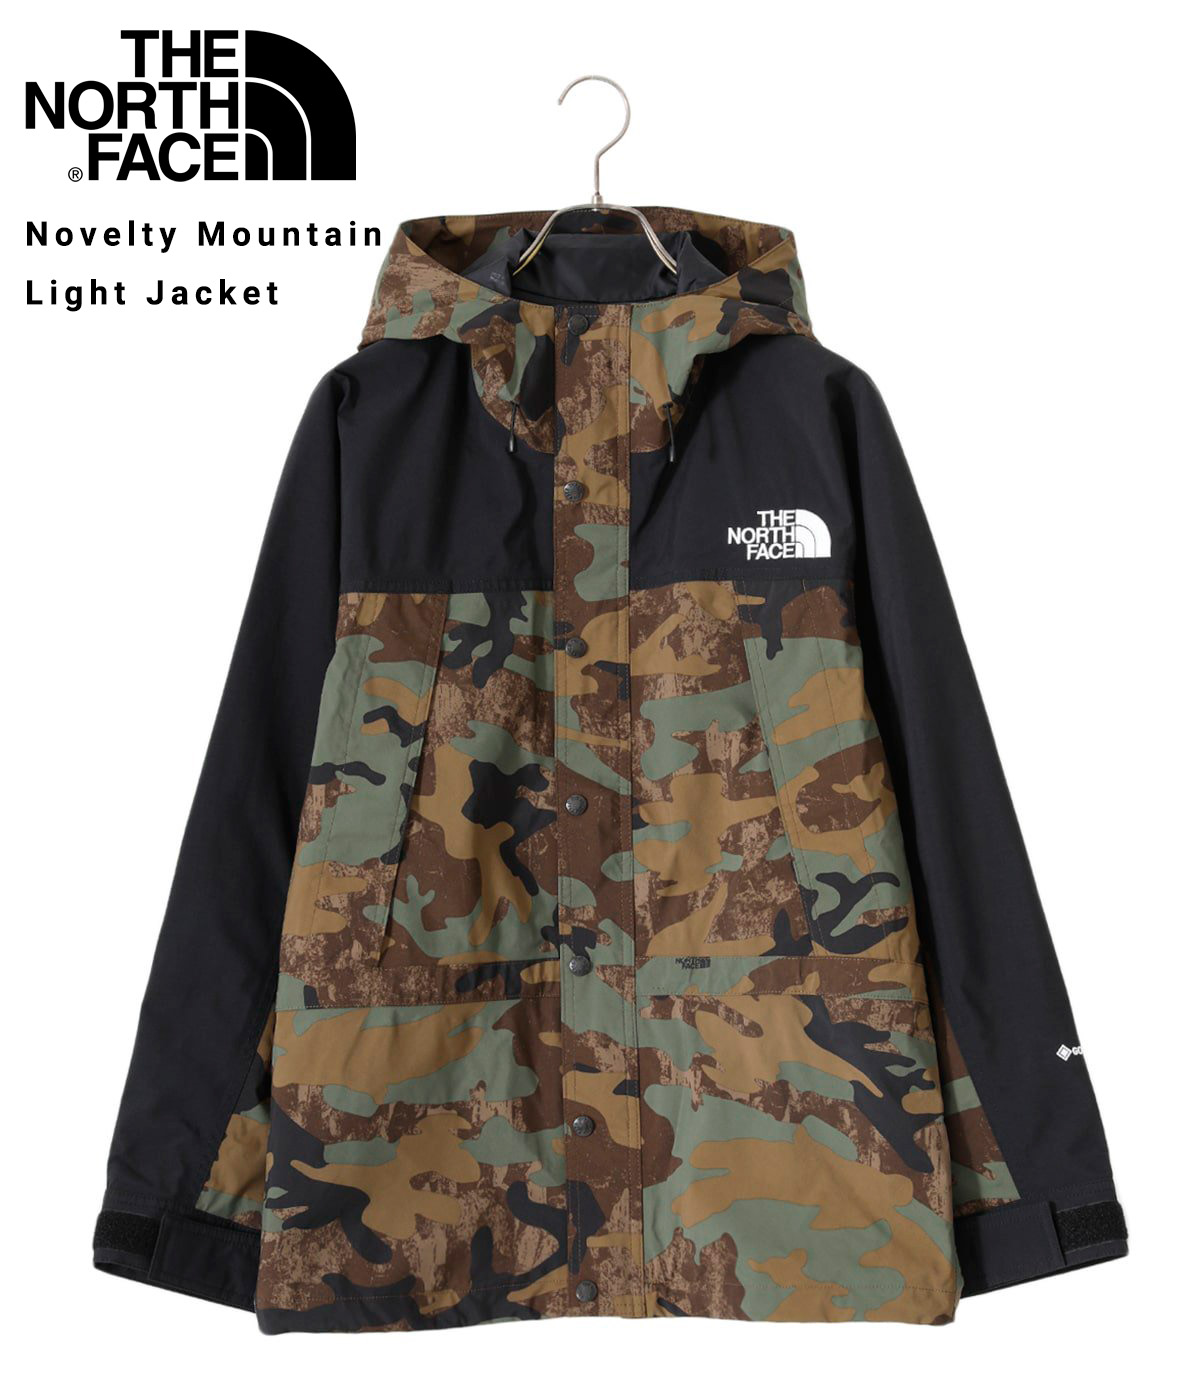 THE NORTH FACE / ザ ノースフェイス ： Novelty Mountain Light Jacket ： NP62237